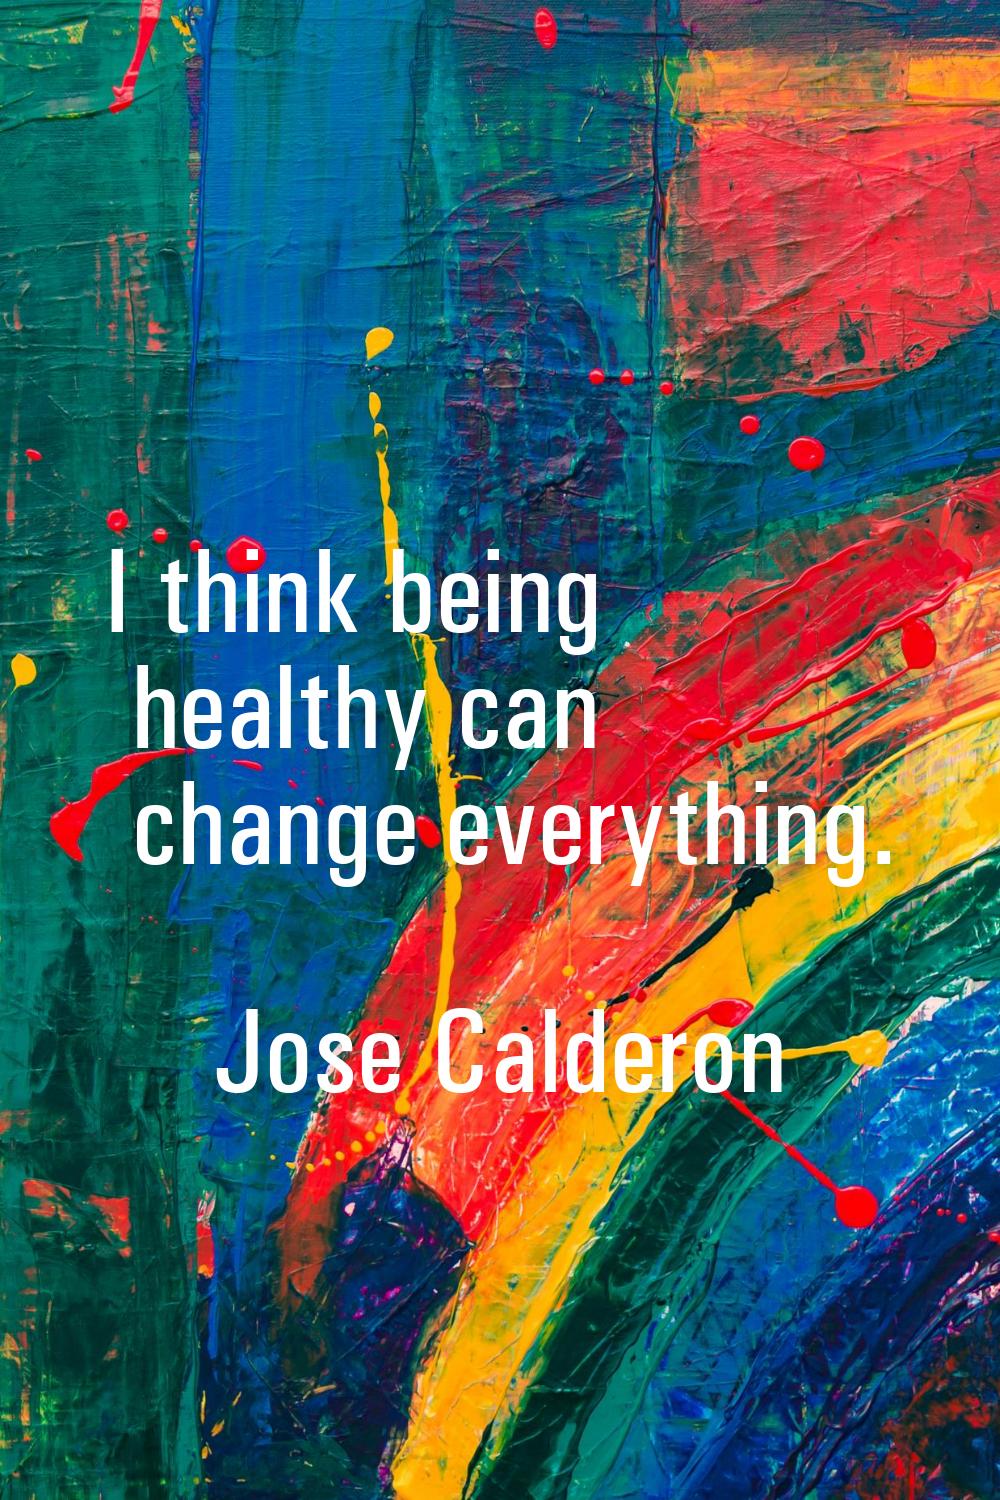 I think being healthy can change everything.